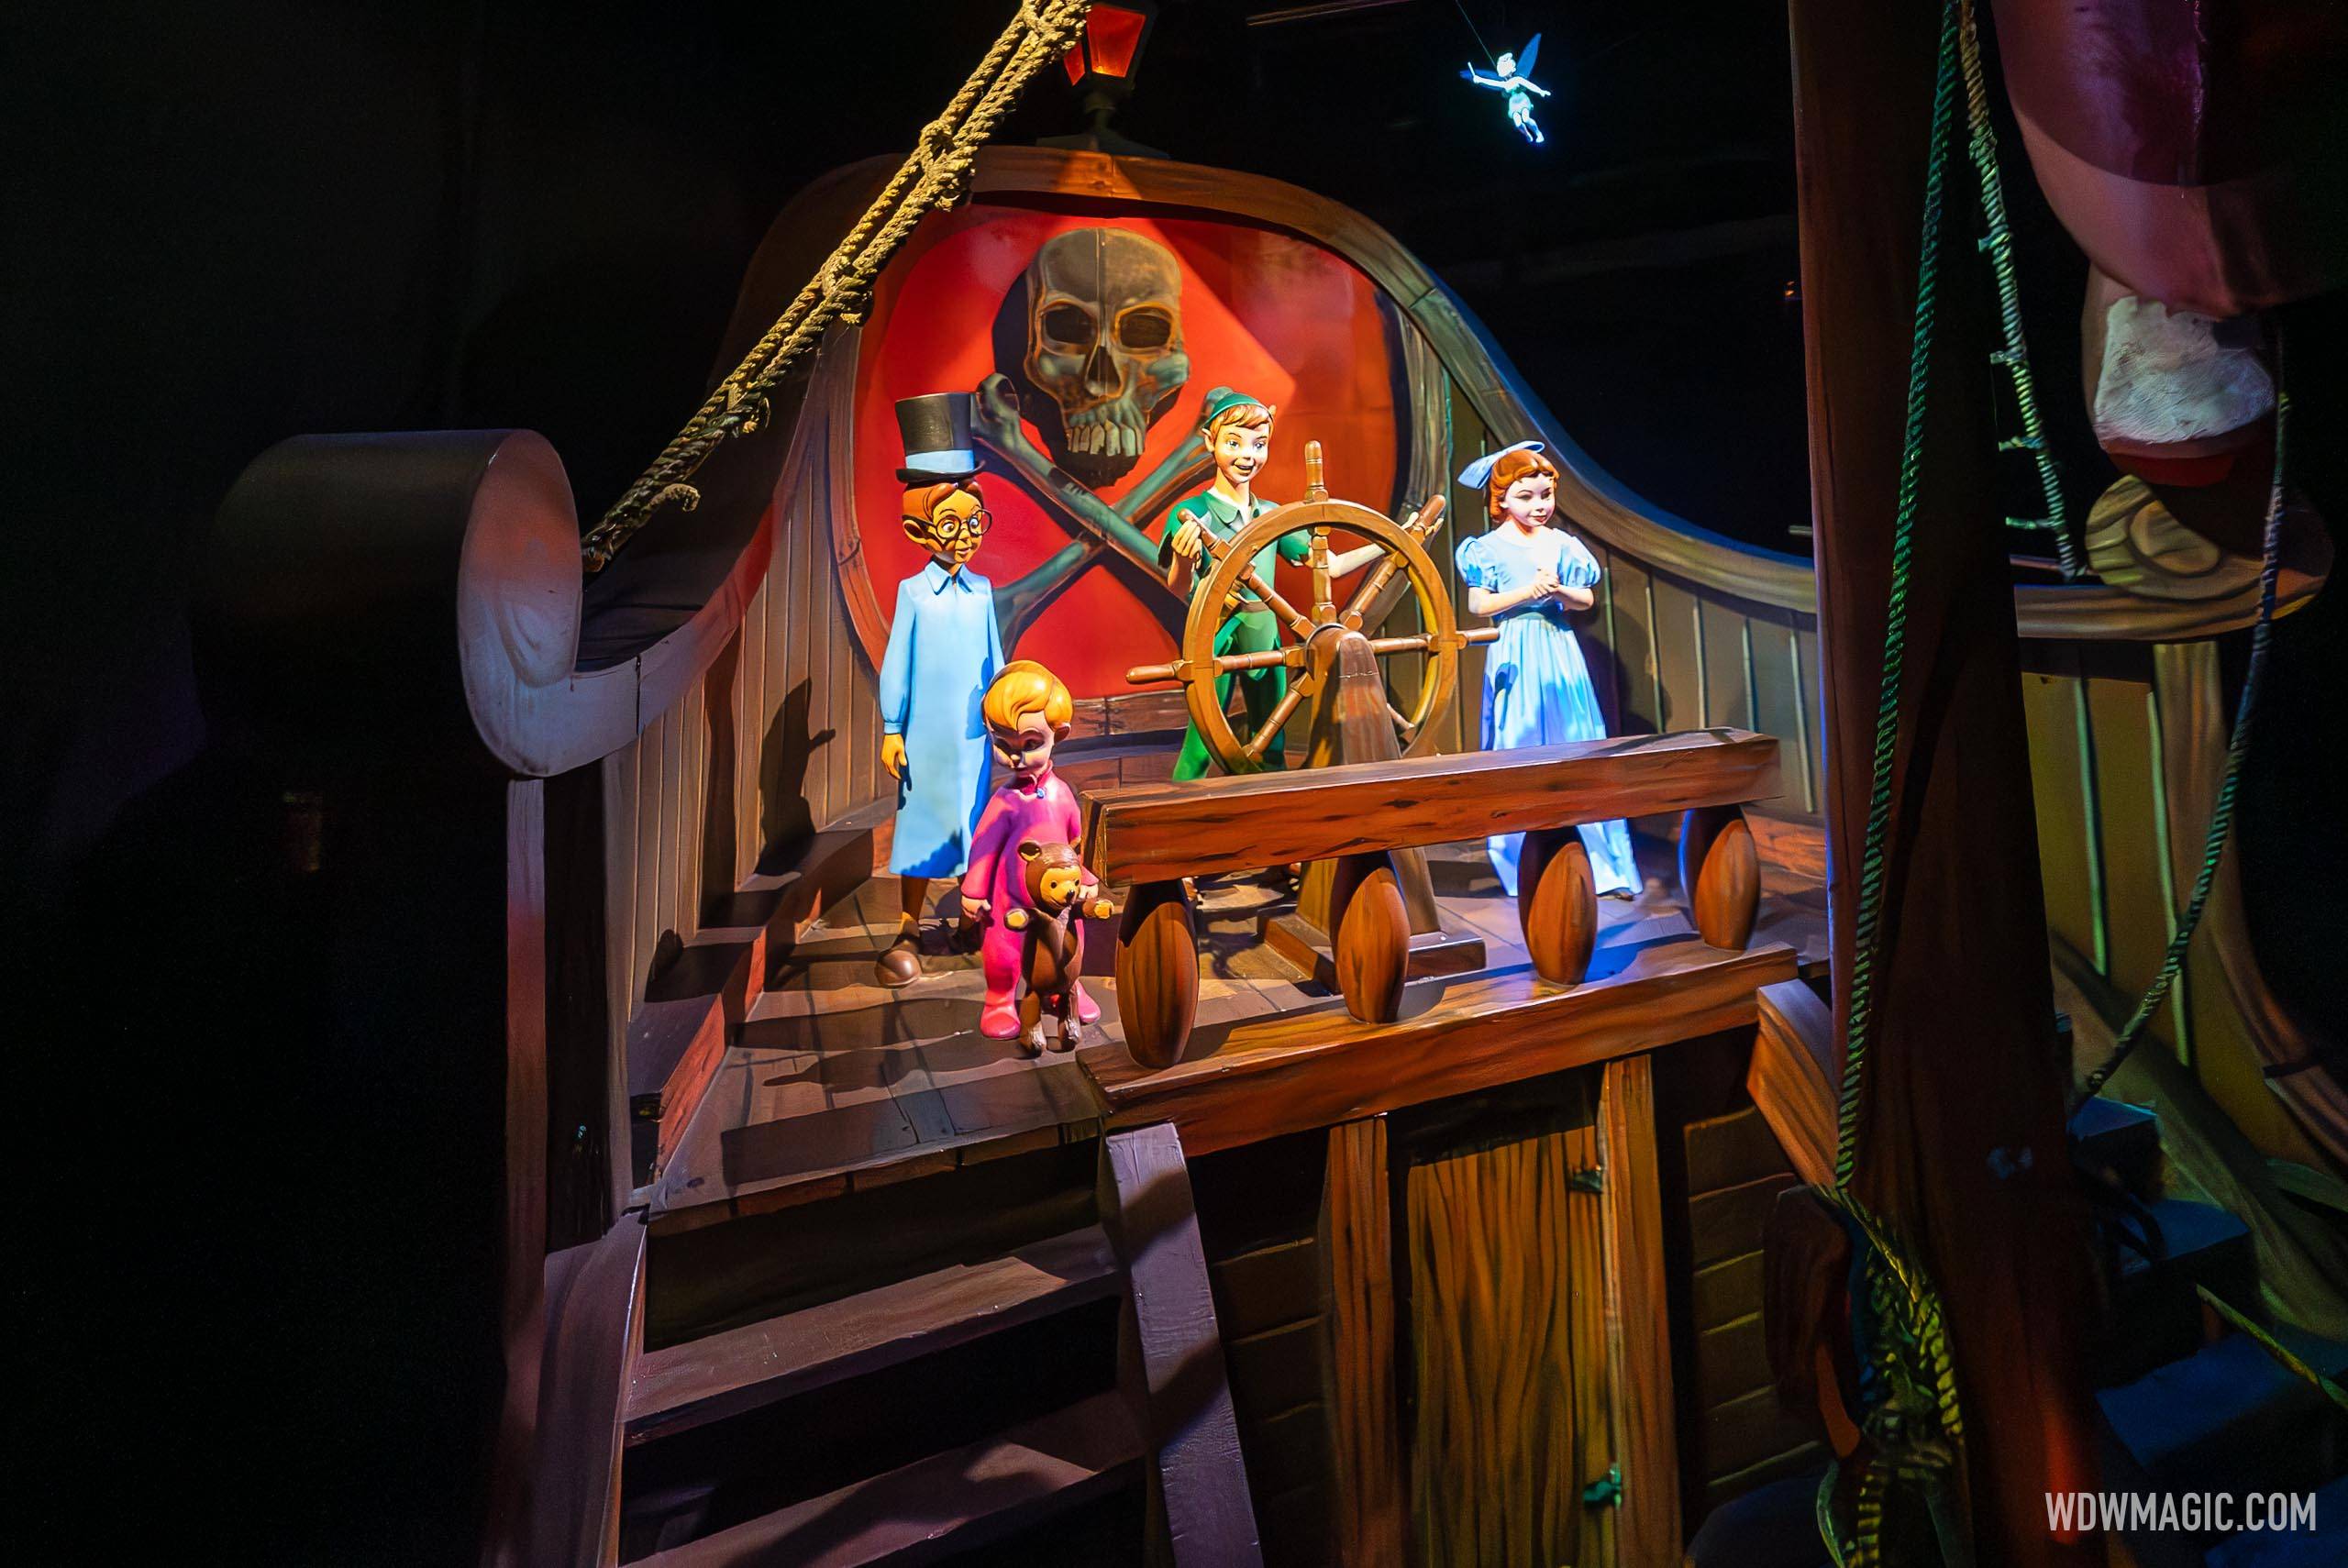 Peter Pan's Flight closing for month-long refurbishment in the New Year